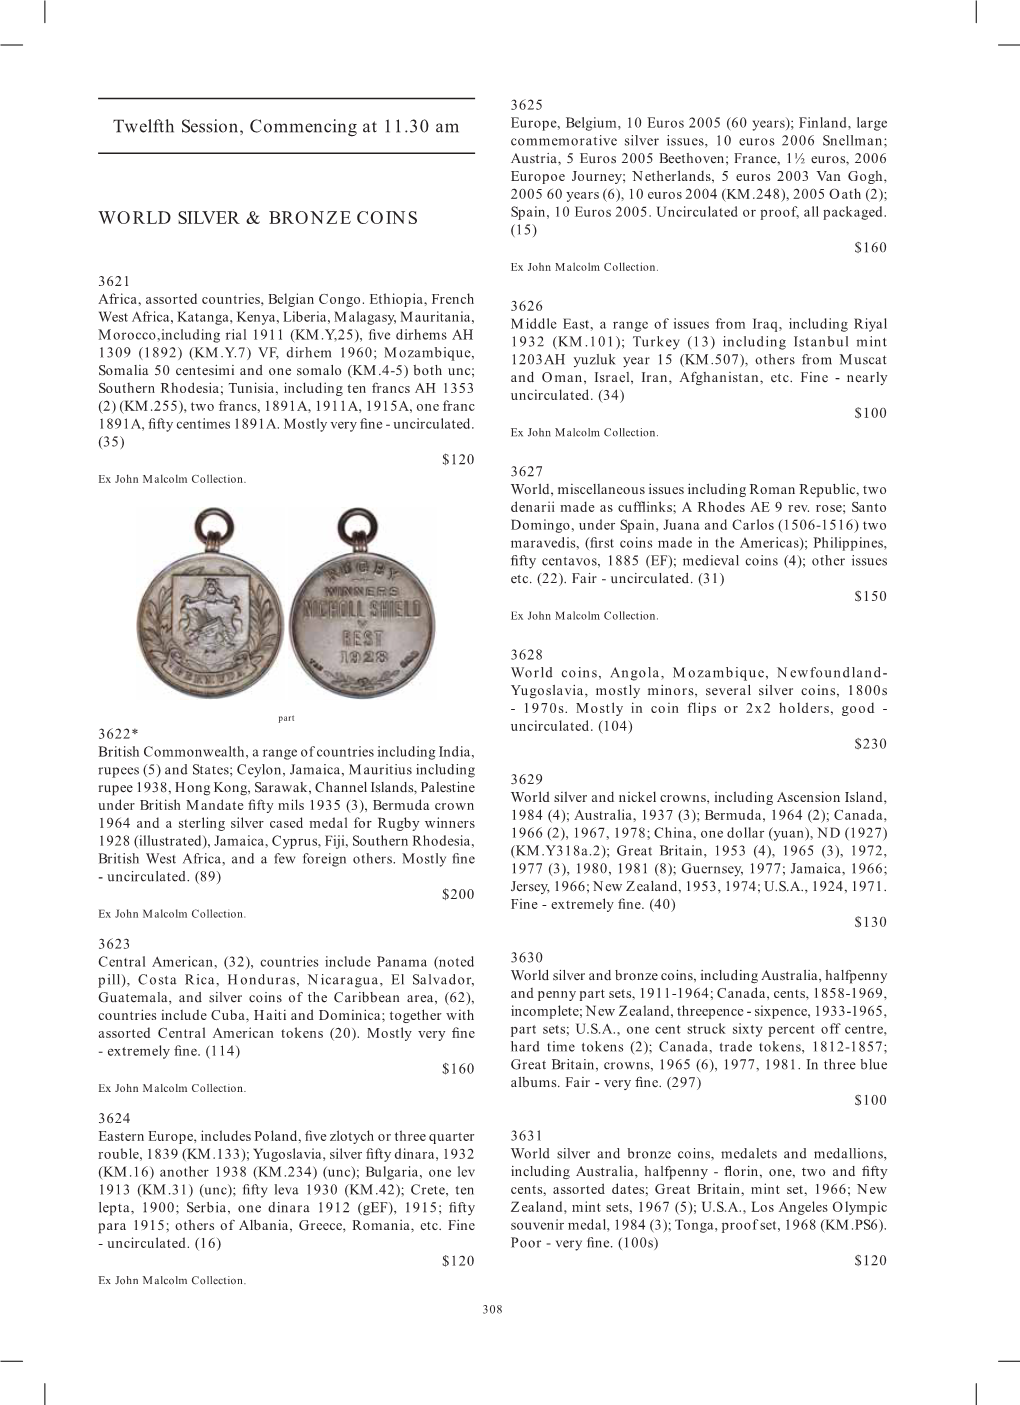 Twelfth Session, Commencing at 11.30 Am WORLD SILVER & BRONZE COINS